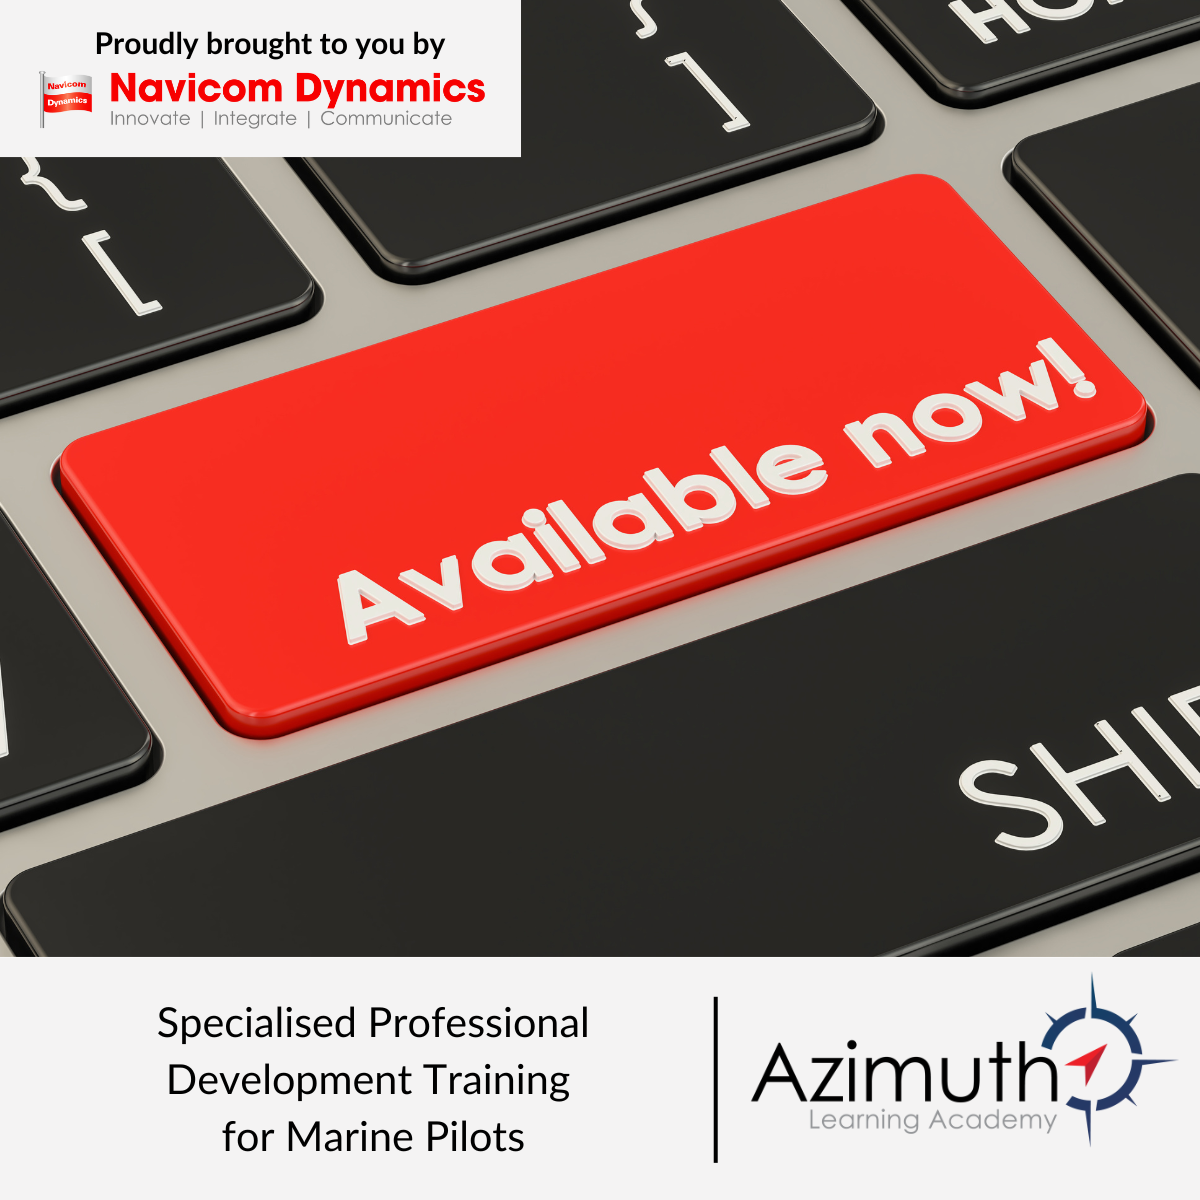 Azimuth course shown on a laptop 